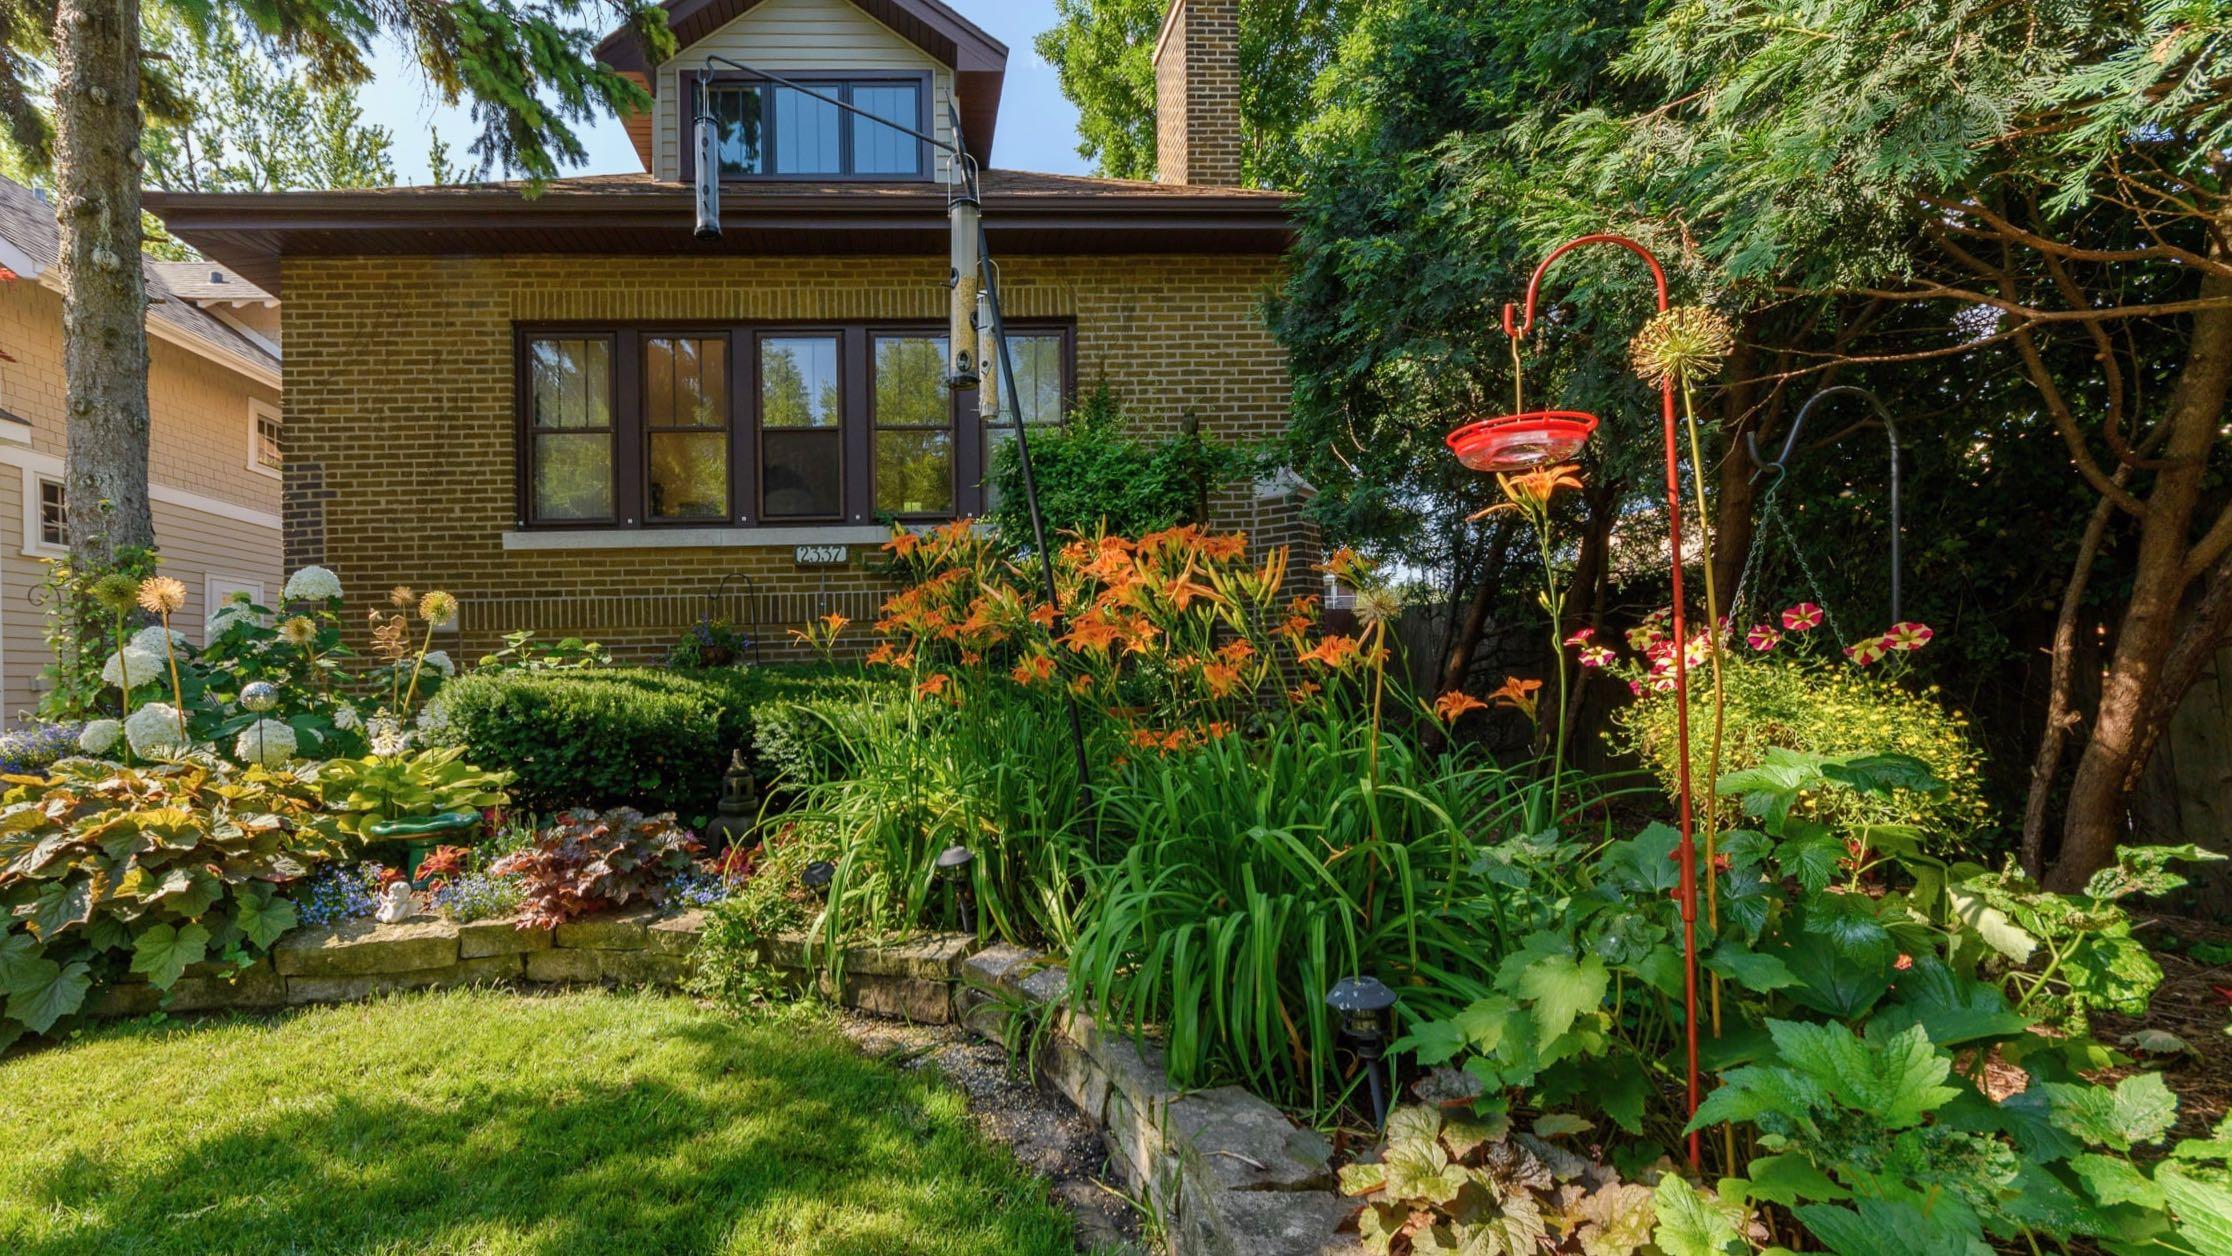 The 2020 winner in the front garden category. (Courtesy of Chicago Bungalow Association)